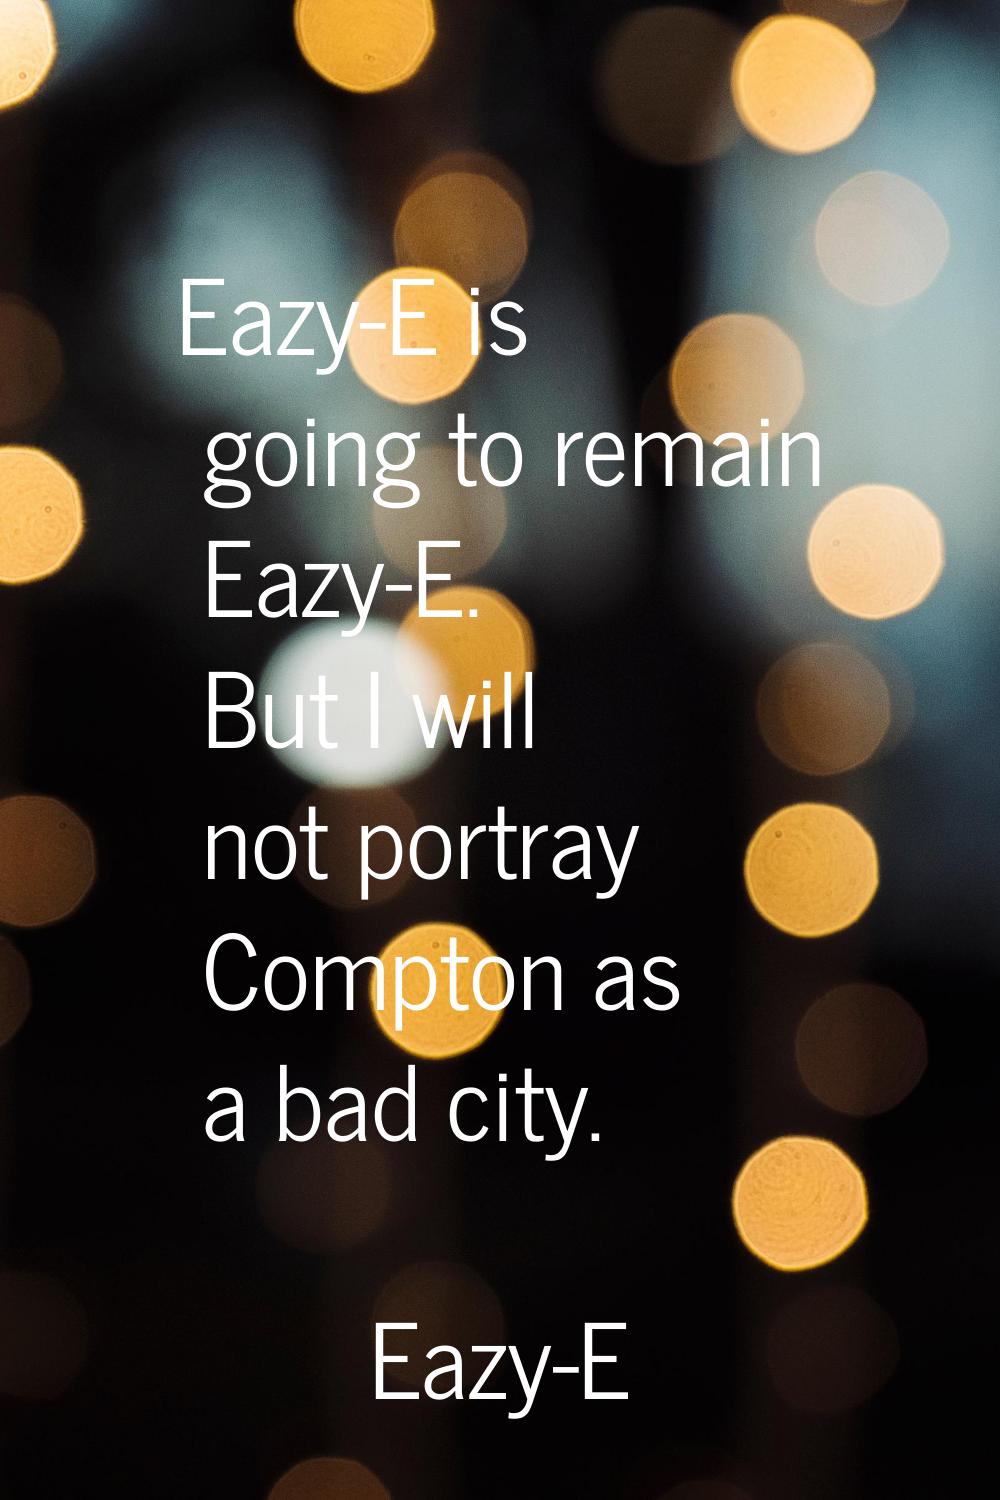 Eazy-E is going to remain Eazy-E. But I will not portray Compton as a bad city.